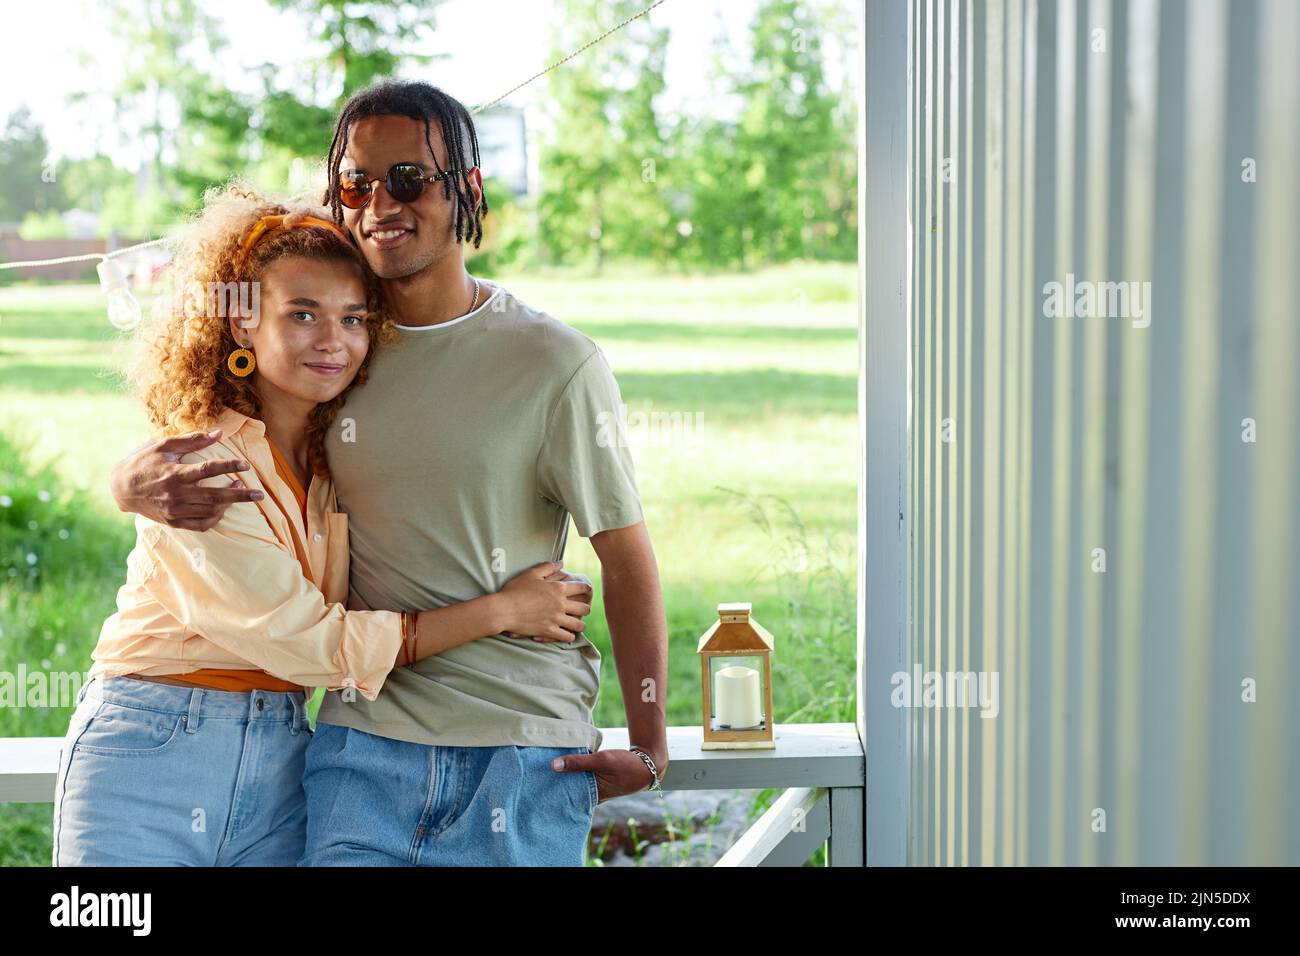 Waist up portrait of loving black couple embracing and looking at camera at outdoor terrace in Summer, copy space Stock Photo